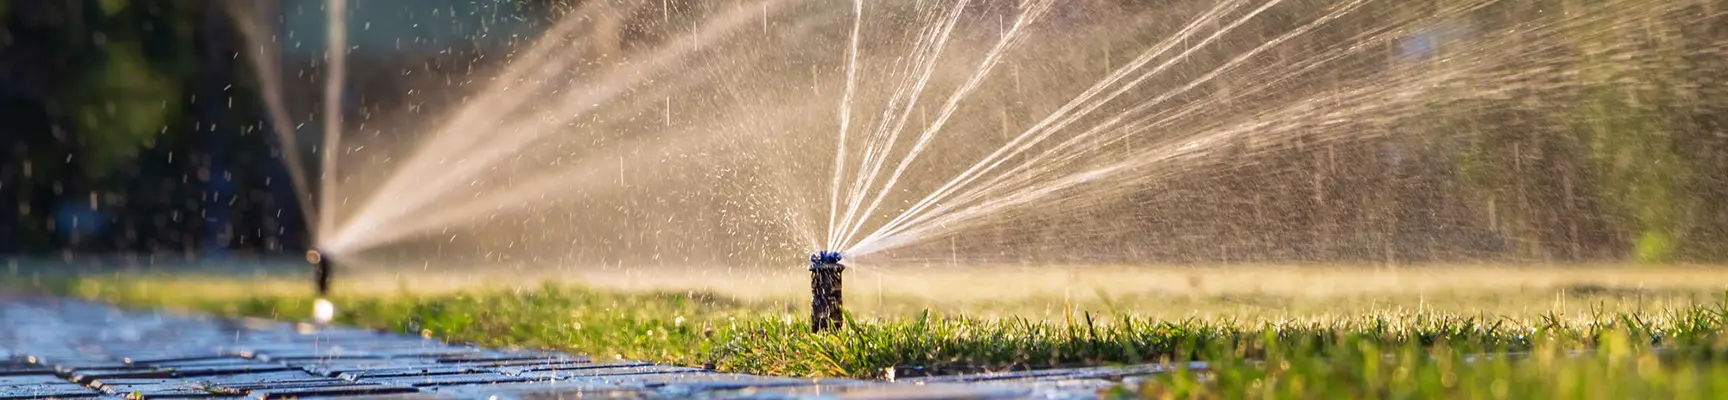 Houston commercial irrigation system